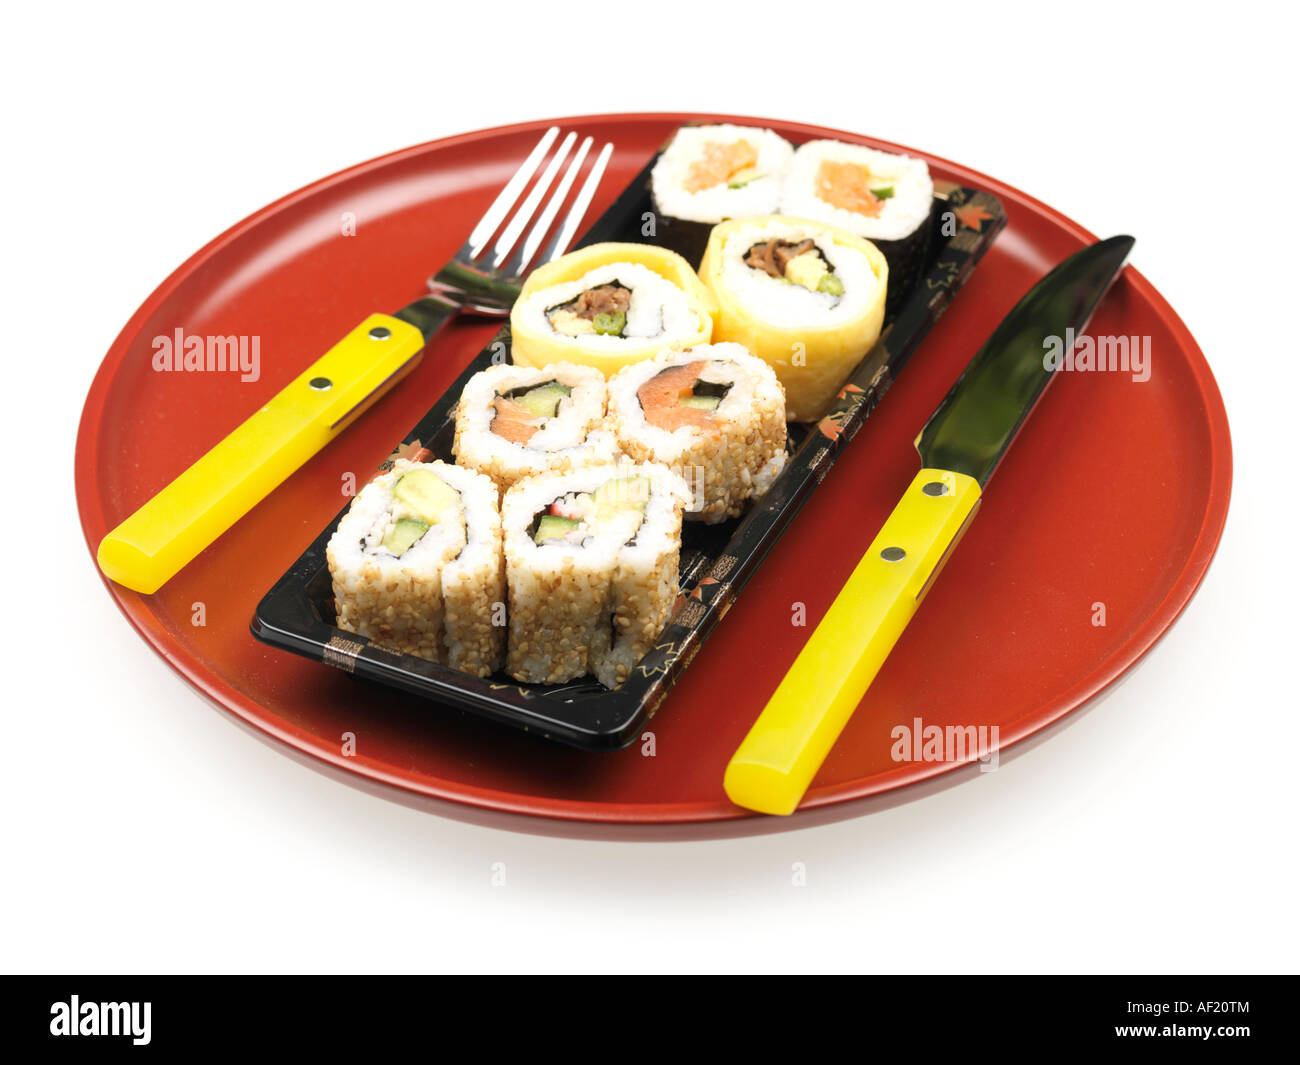 Selection Of Assorted Shop Bought Colourful Japanese Style Sushi Snacks Isolated Against A White Background With No People And A Clipping Path Stock Photo